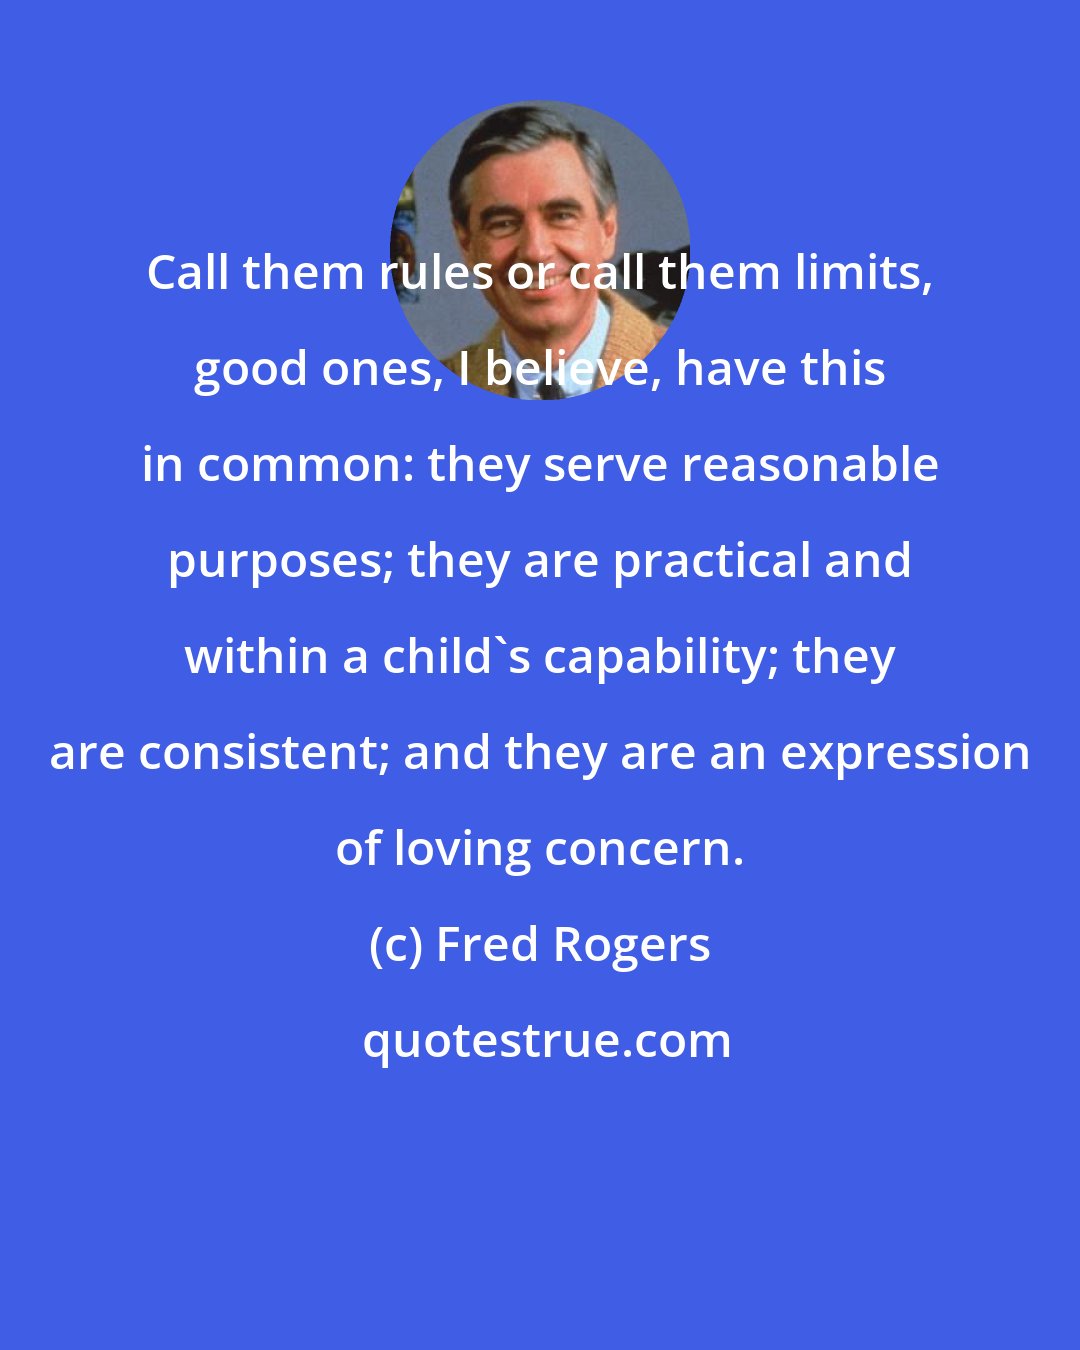 Fred Rogers: Call them rules or call them limits, good ones, I believe, have this in common: they serve reasonable purposes; they are practical and within a child's capability; they are consistent; and they are an expression of loving concern.